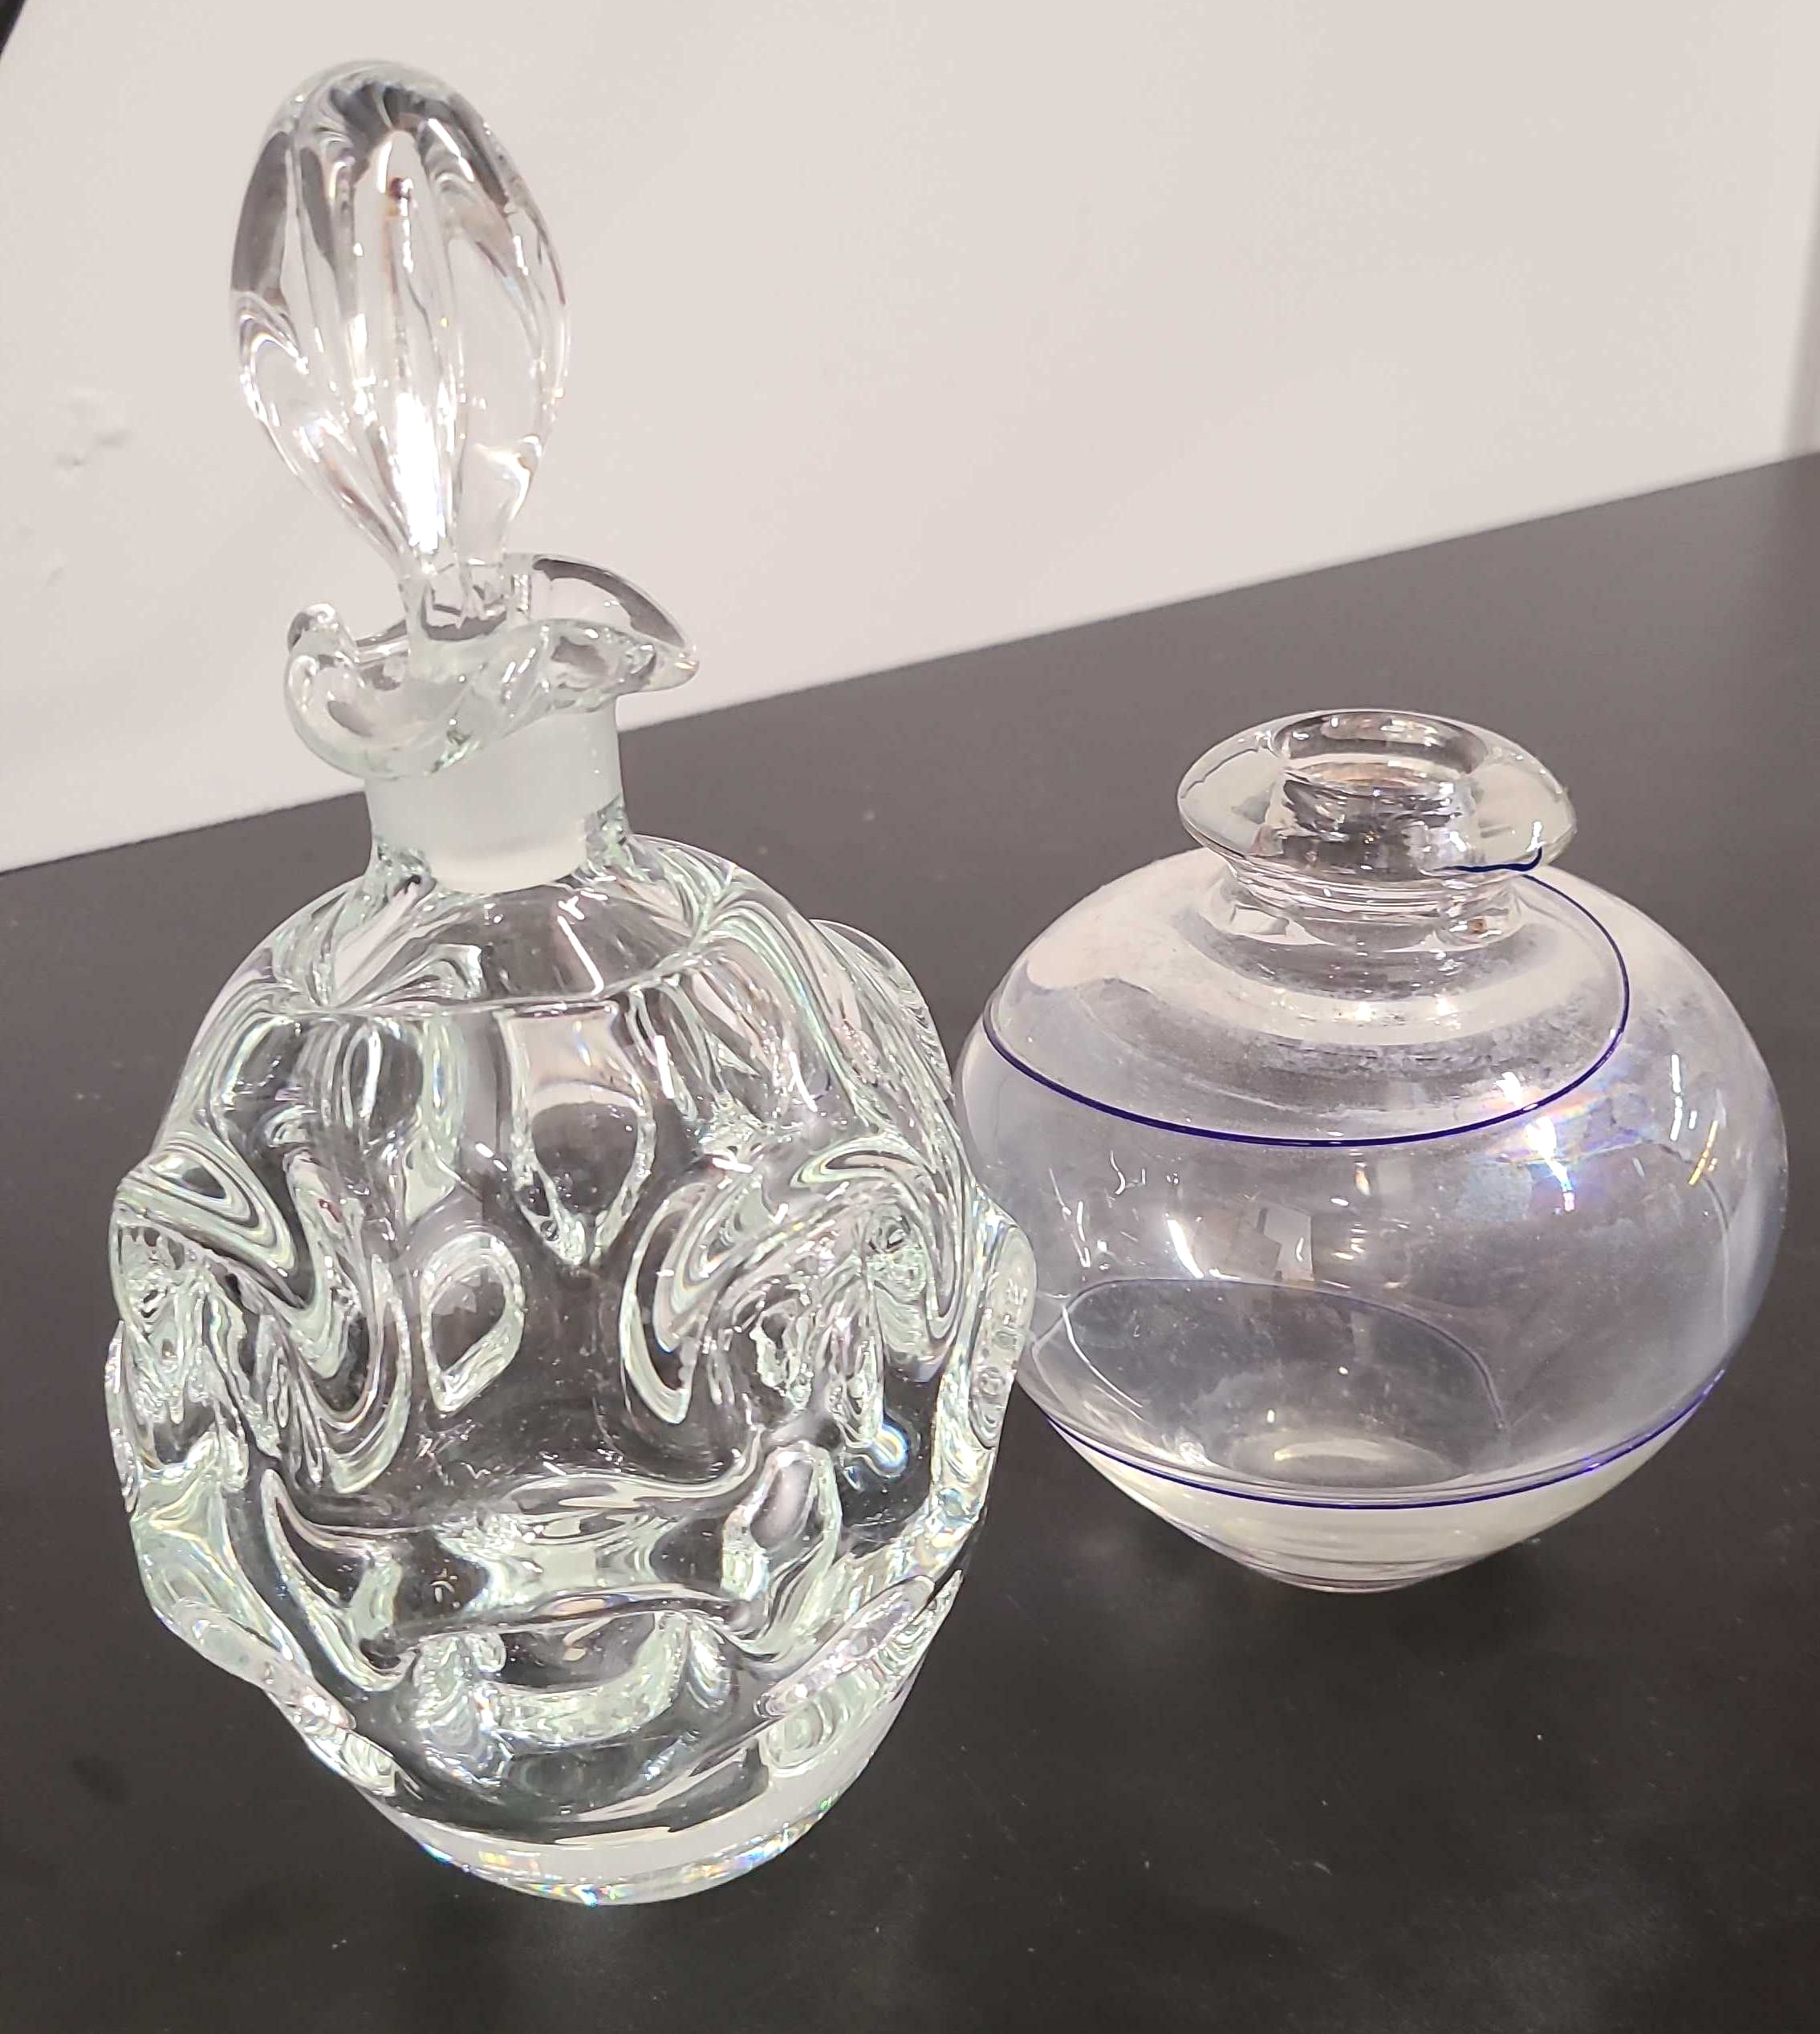 Sold at Auction: Crystal liquor bottle Christian Dior